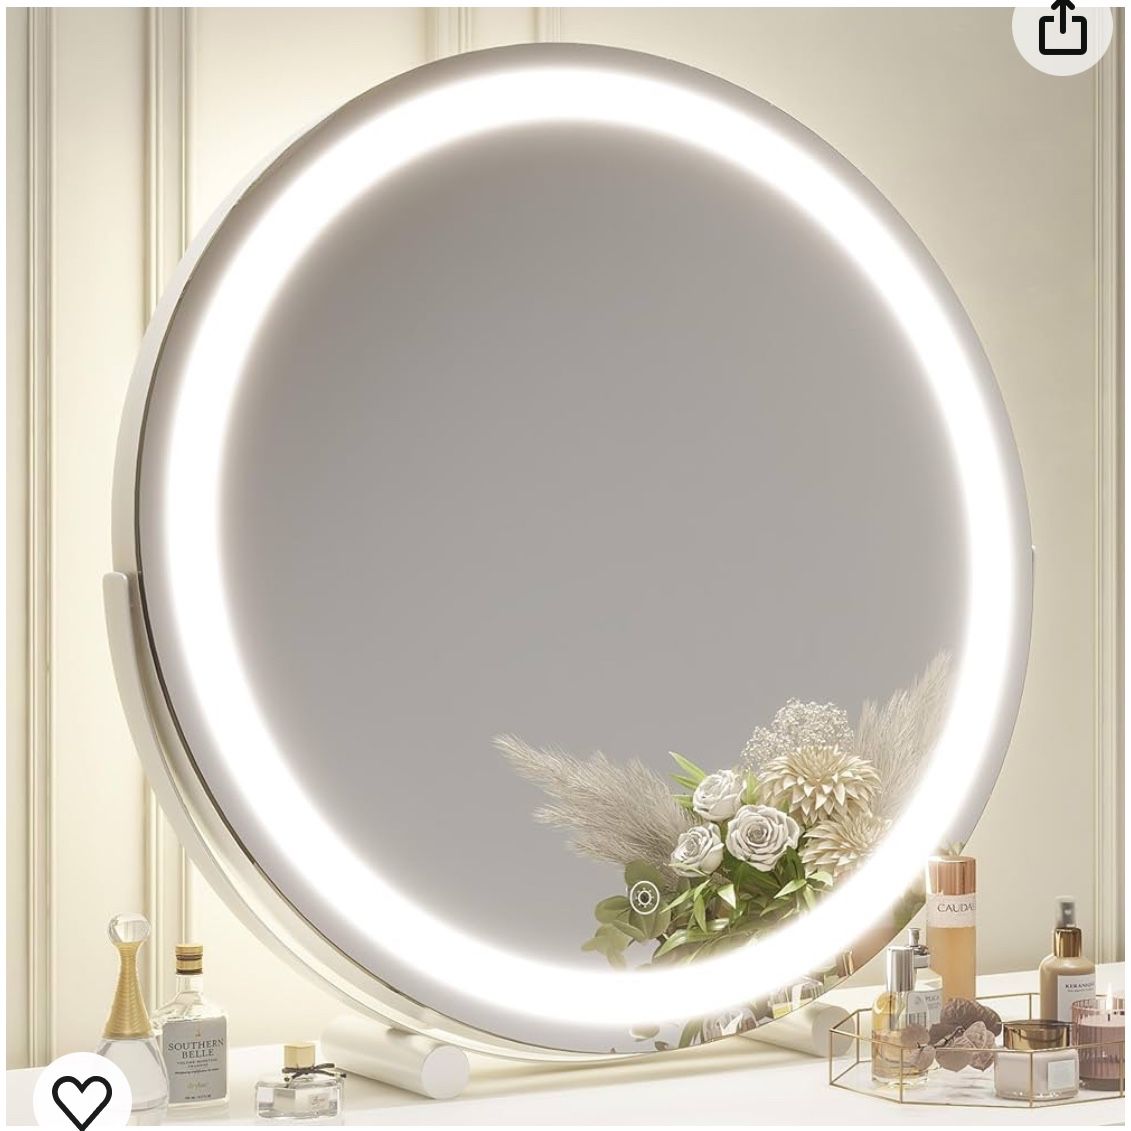 ROLOVE Vanity Makeup Mirror with Lights, 18 Inch LED Makeup Mirror, Lighted Vanity Mirror with Lights, Smart Touch Control 3 Colors Dimmable Round Mir